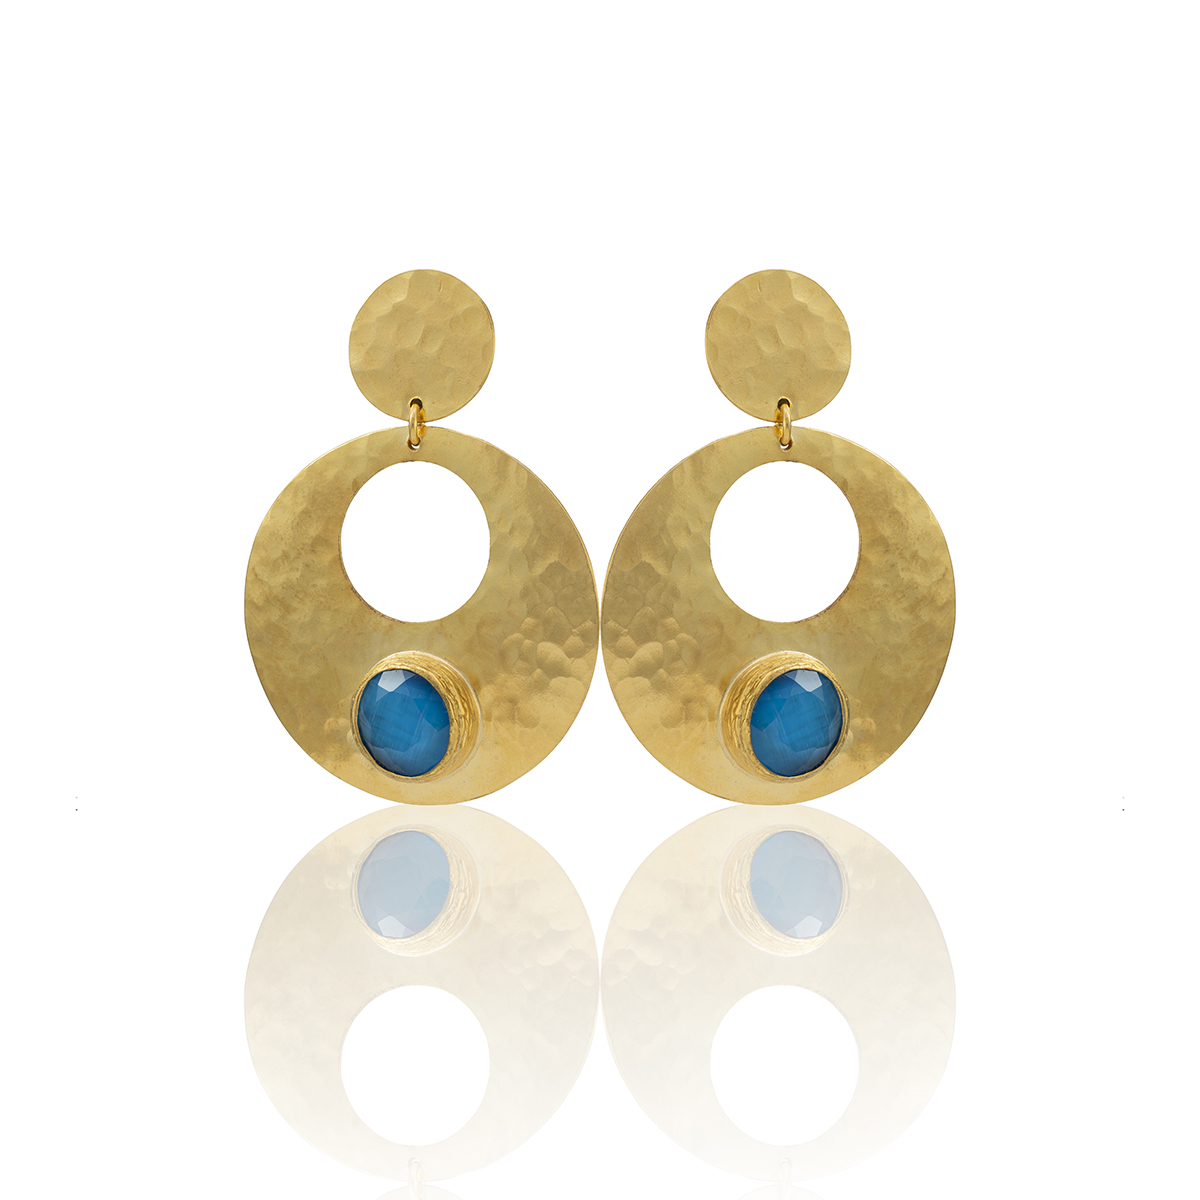 E26 22k Gold Plated Women's Earring - 100% Handcrafted Special Design